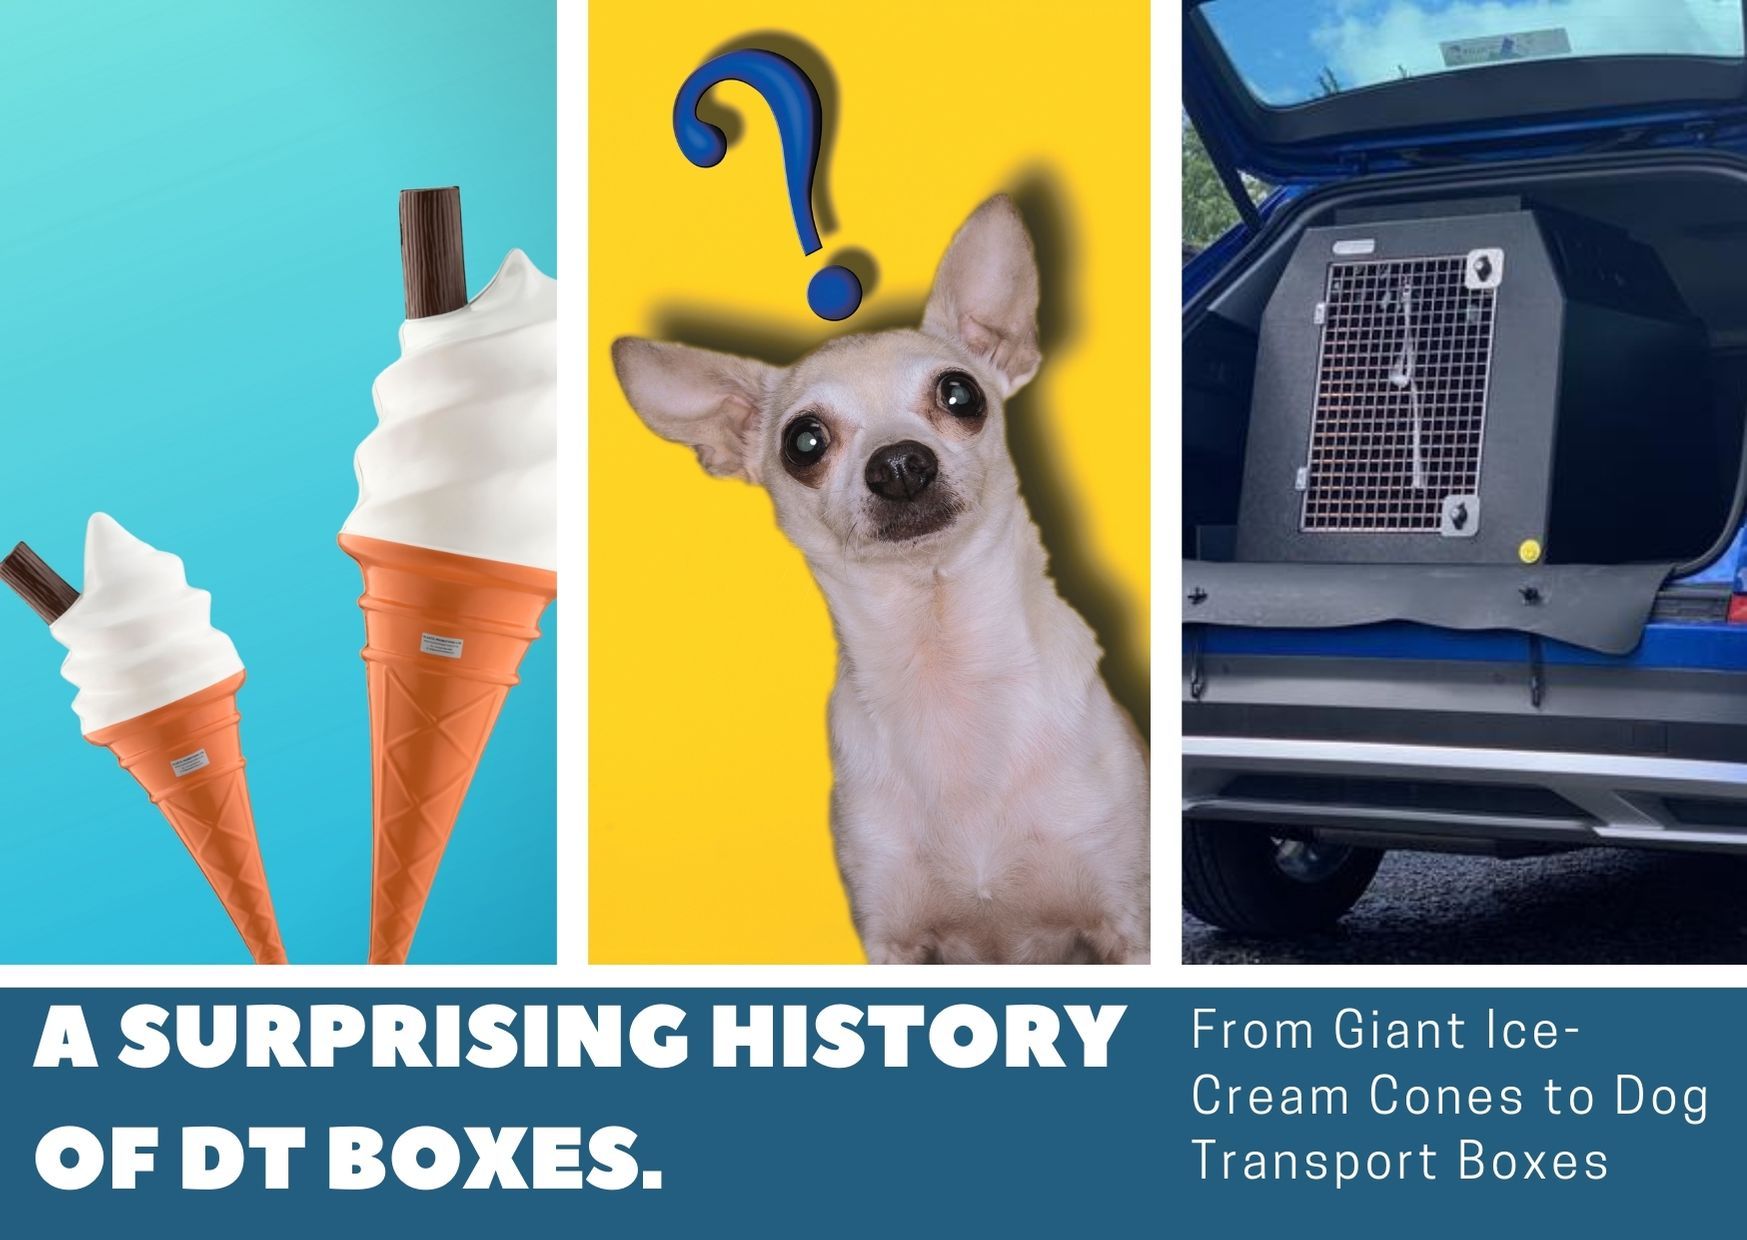 From Giant Ice-Cream Cones to Dog Transport Boxes- A Surprising History of DT Boxes.